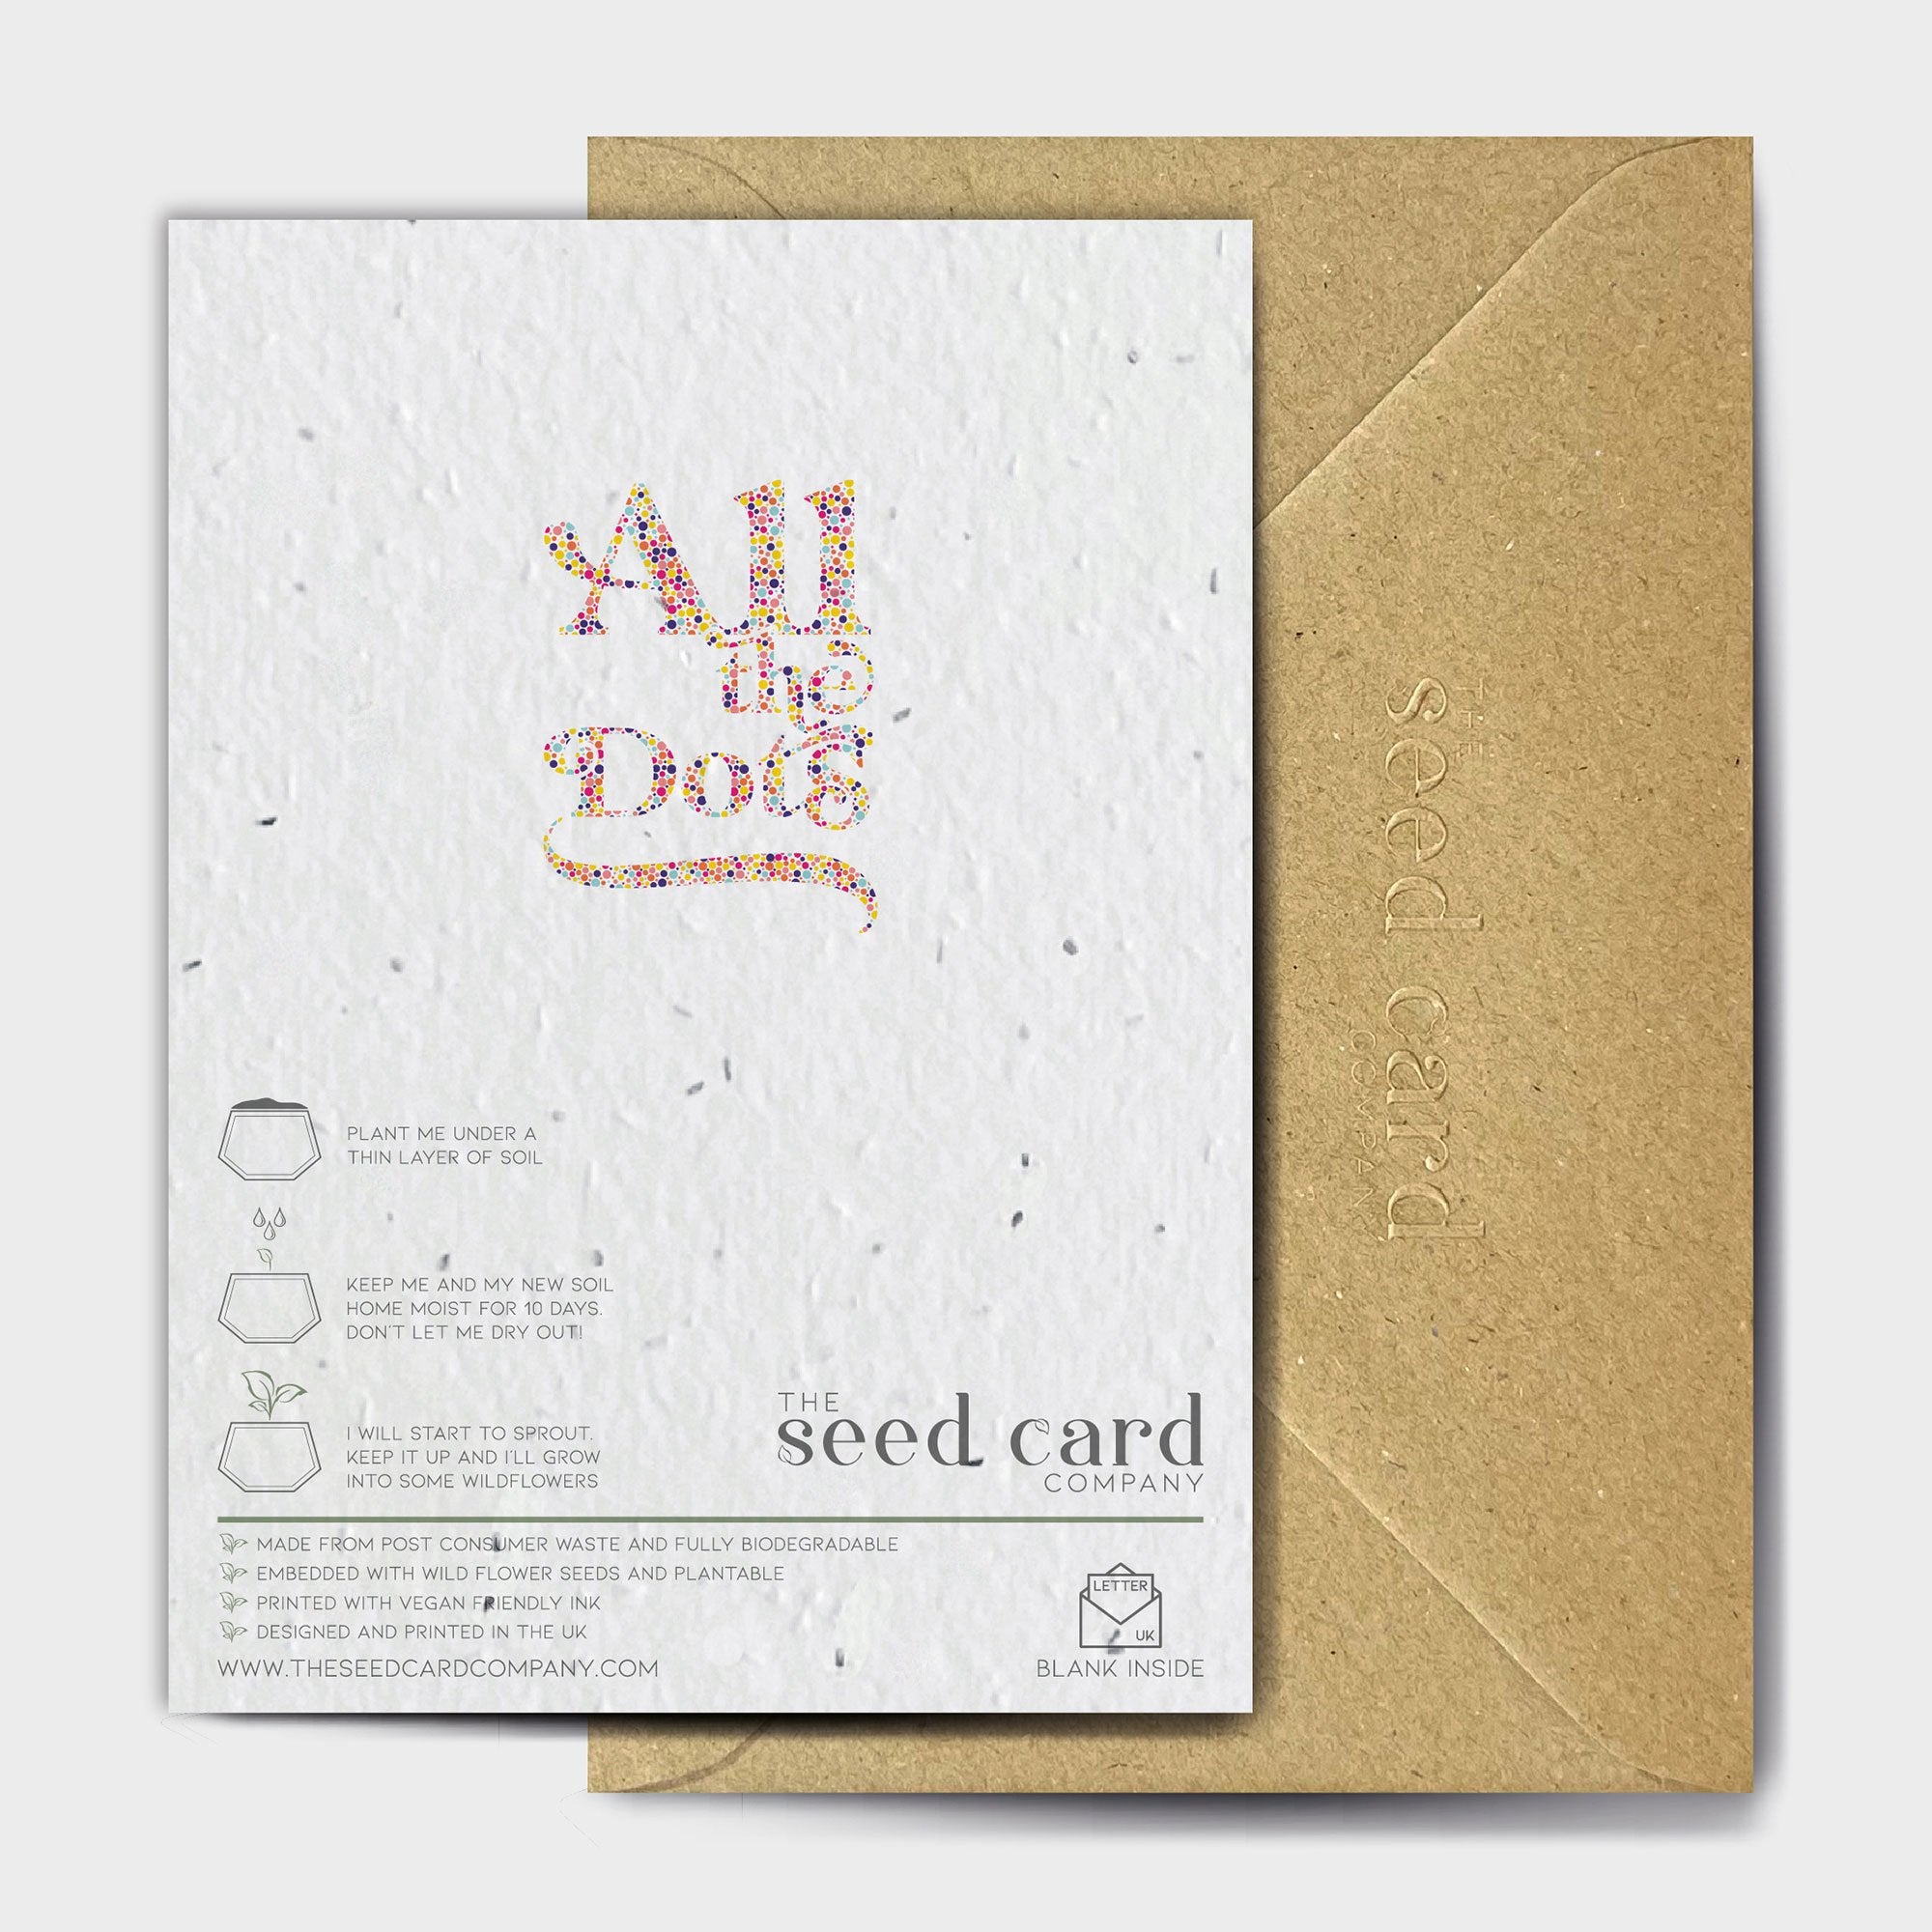 Shop online Mumbelievable - 100% biodegradable seed-embedded cards Shop -The Seed Card Company